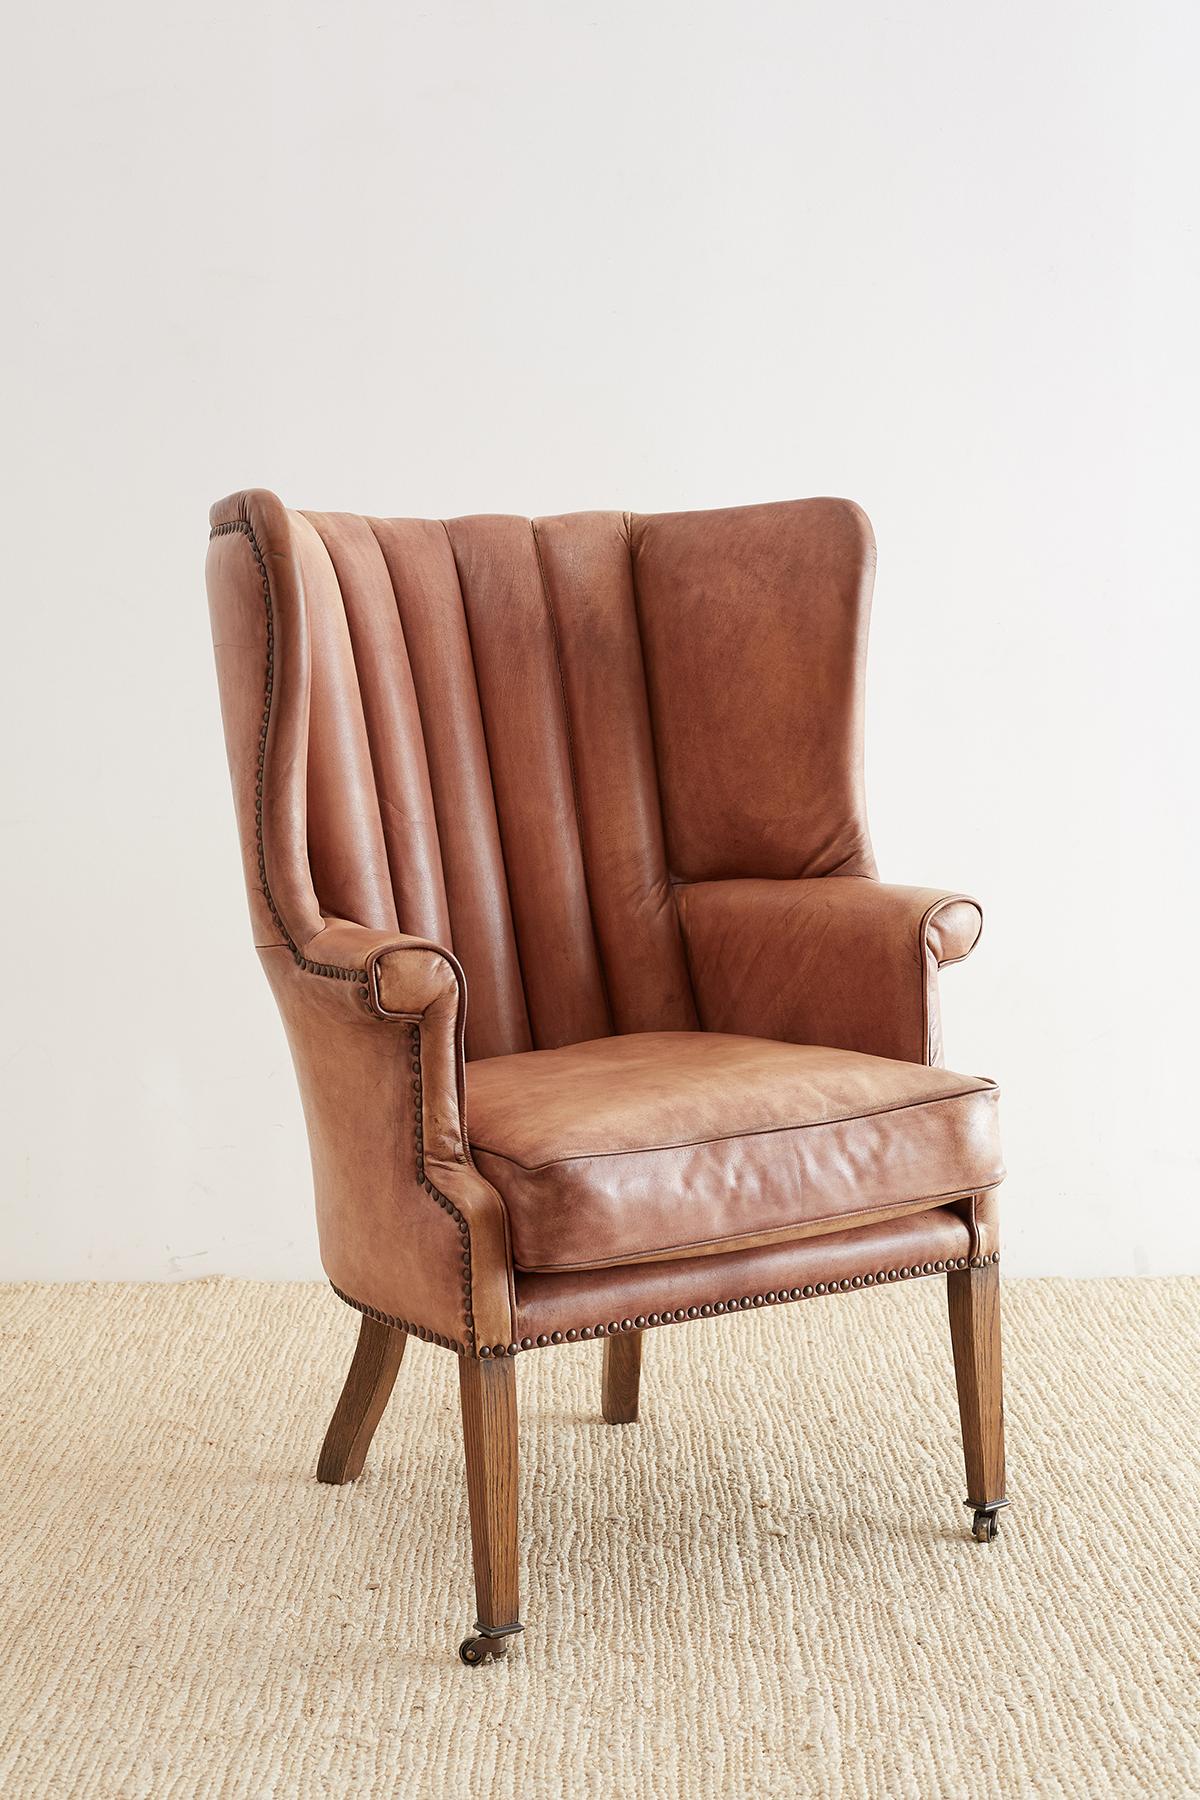 Distinctive leather wing chair or porter's chair made in the English Georgian taste. Features a barrel back design with a channelled back support. The leather frame is bordered by brass nailhead trim and fitted with a loose cushion. The thick